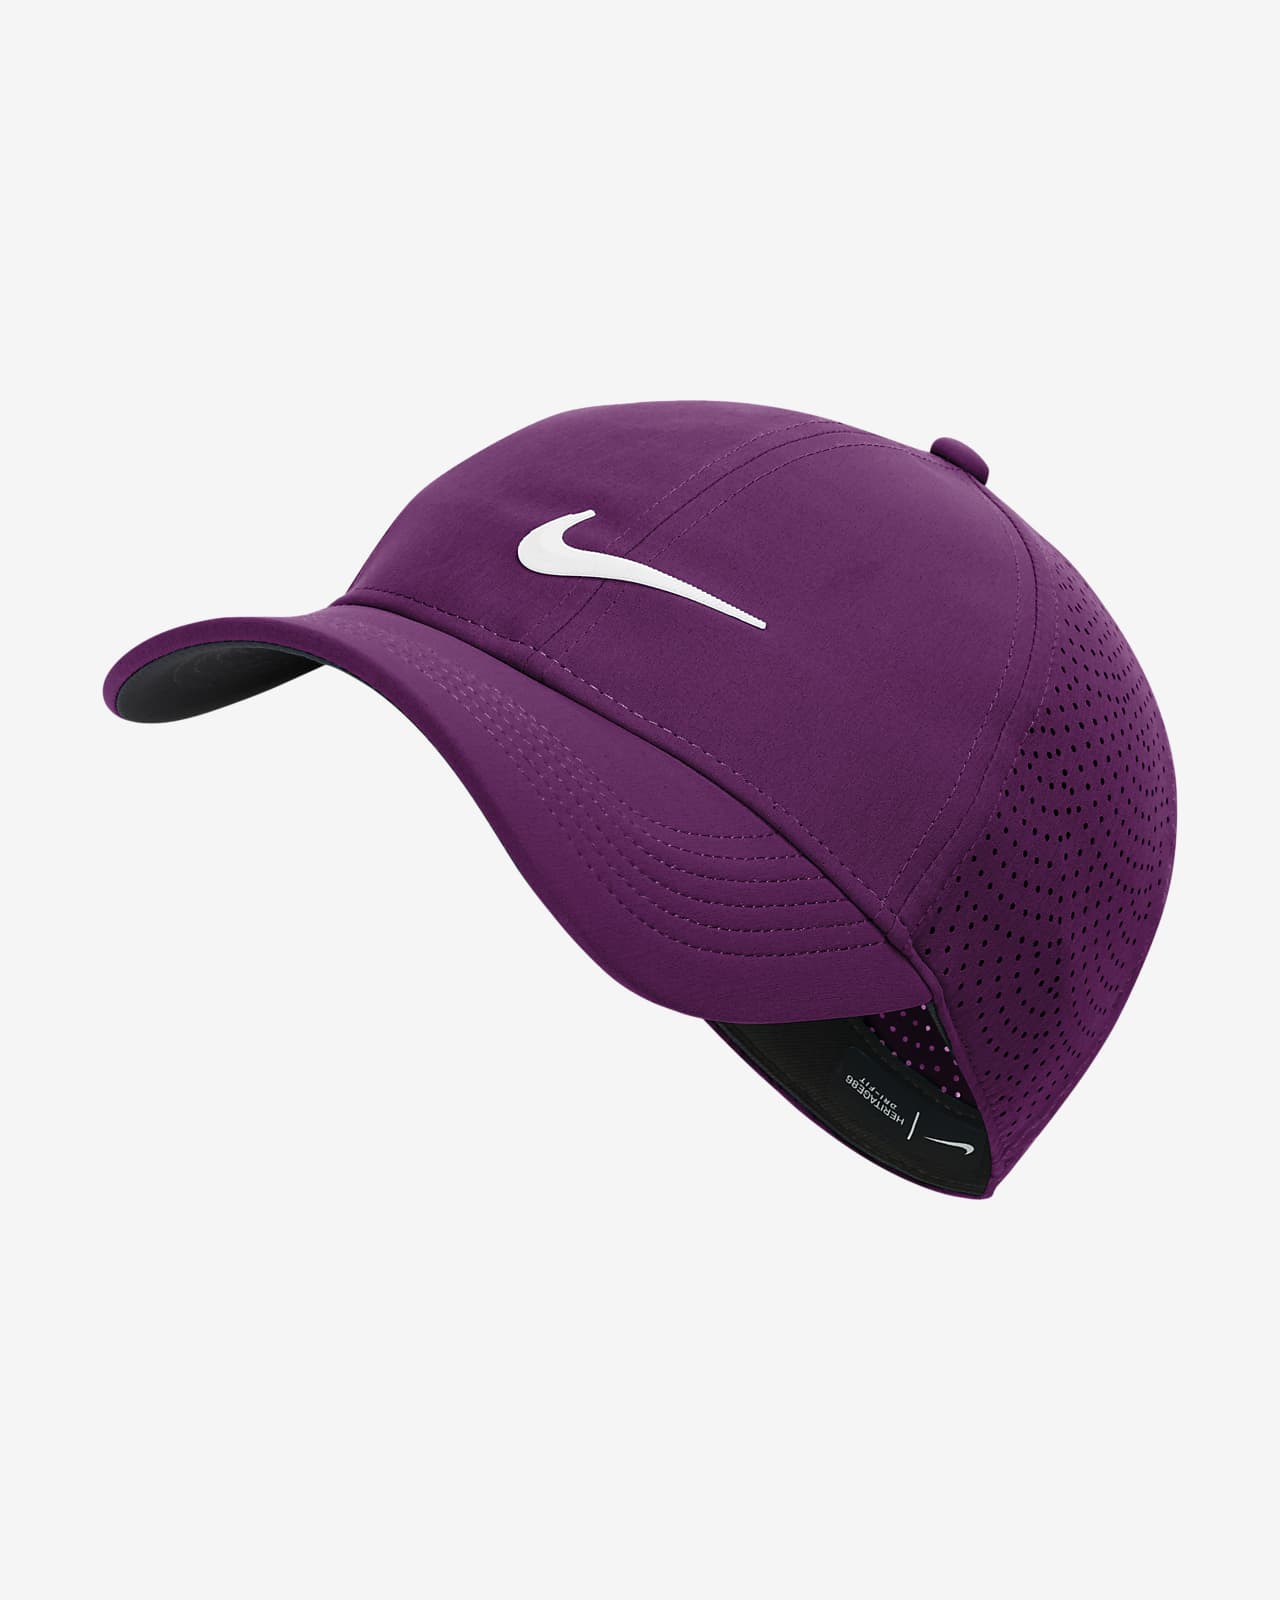 red nike golf hat